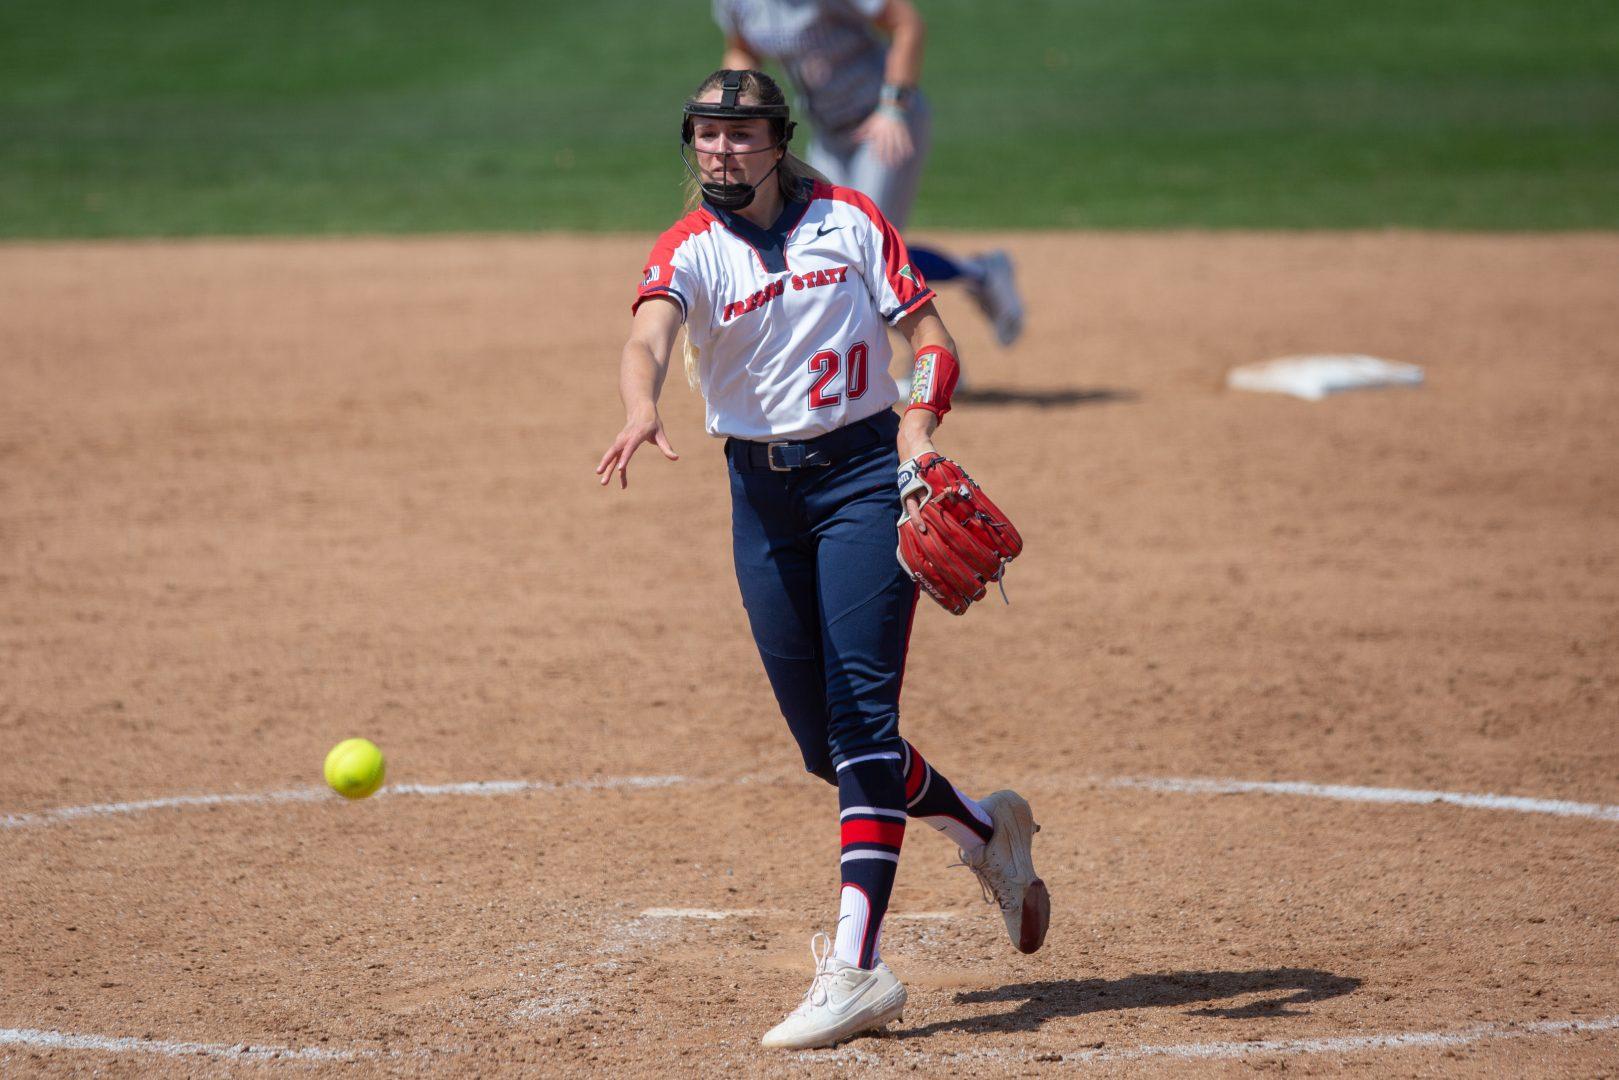 Fresno+State%E2%80%99s+Danielle+Lung+throws+a+pitch+during+the+Bulldogs%E2%80%99+4-3+win+over+San+Jose%0AState+in+the+series+finale+at+Margie+Wright+Diamond+on+Sunday%2C+March+24%2C+2019.+%28Jose+Romo%0AJr.%2FThe+Collegian%29.